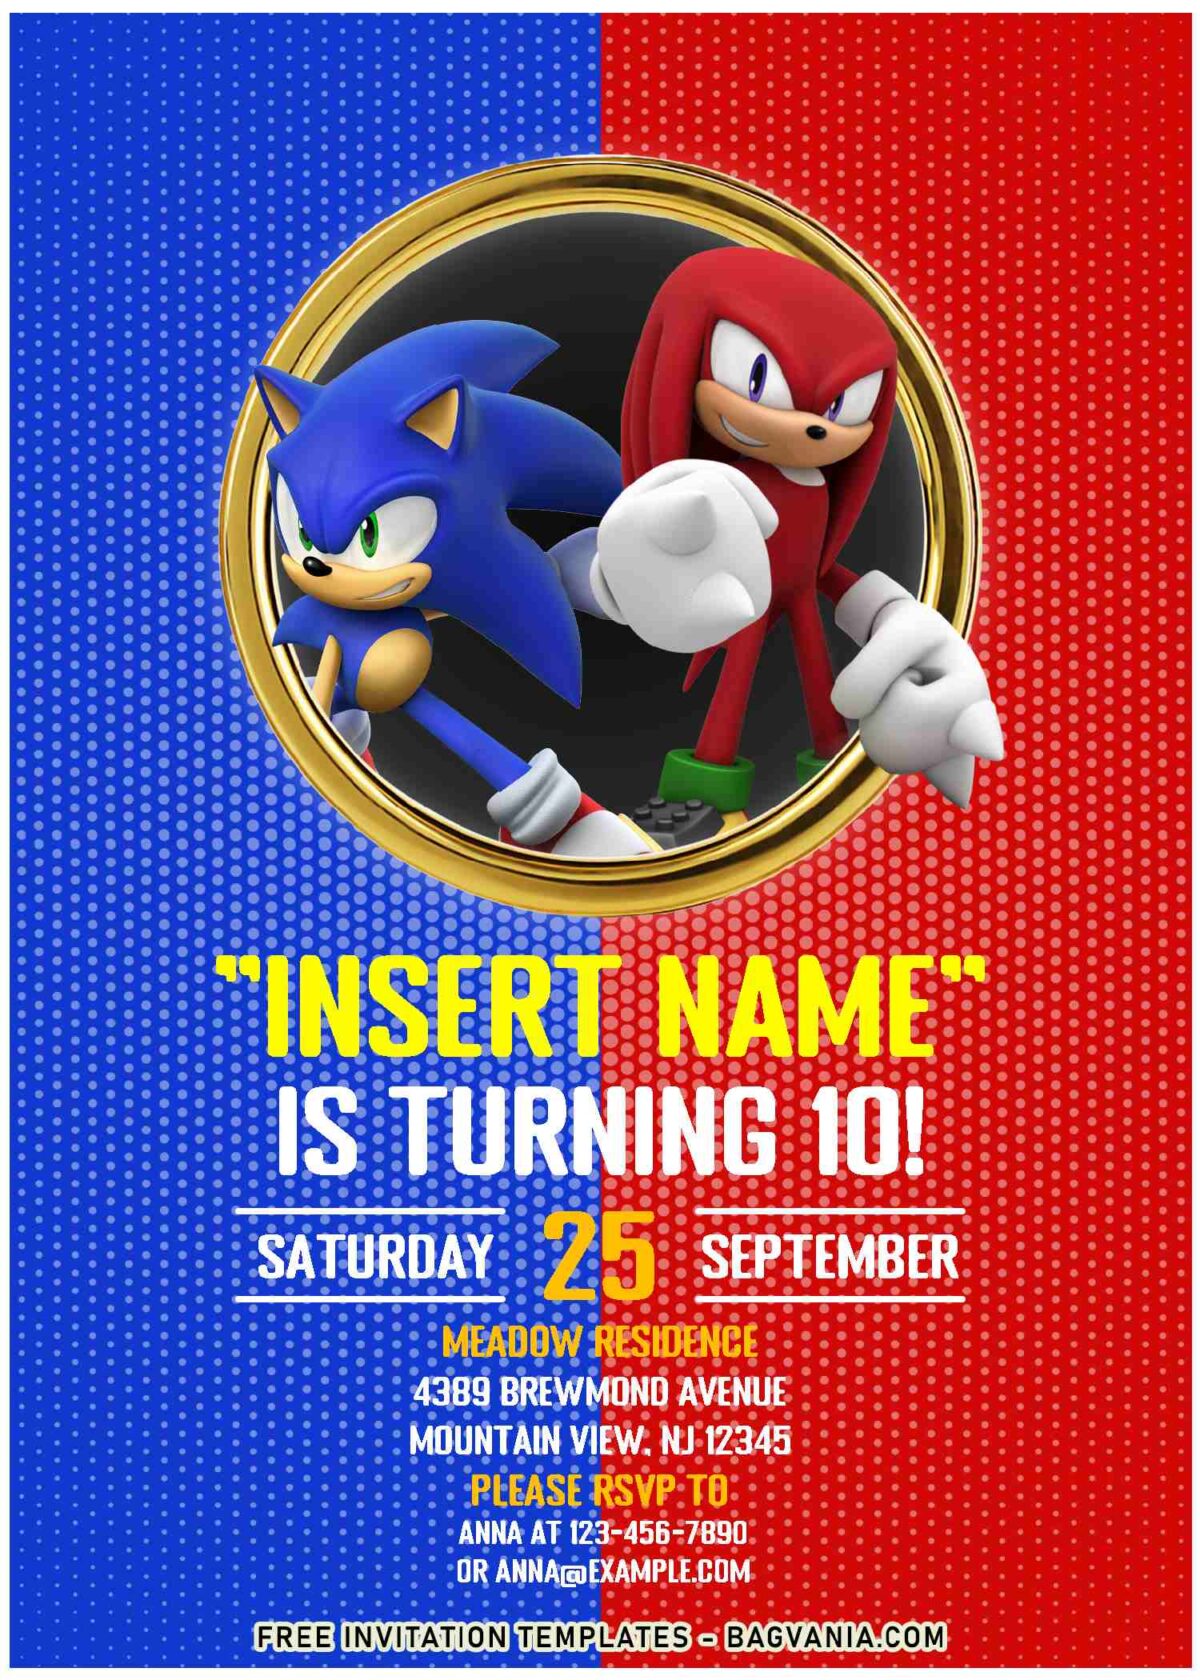 (Free Editable PDF) Sonic The Hedgehog Movie Themed Birthday Invitation Templates with Sonic Gold Ring